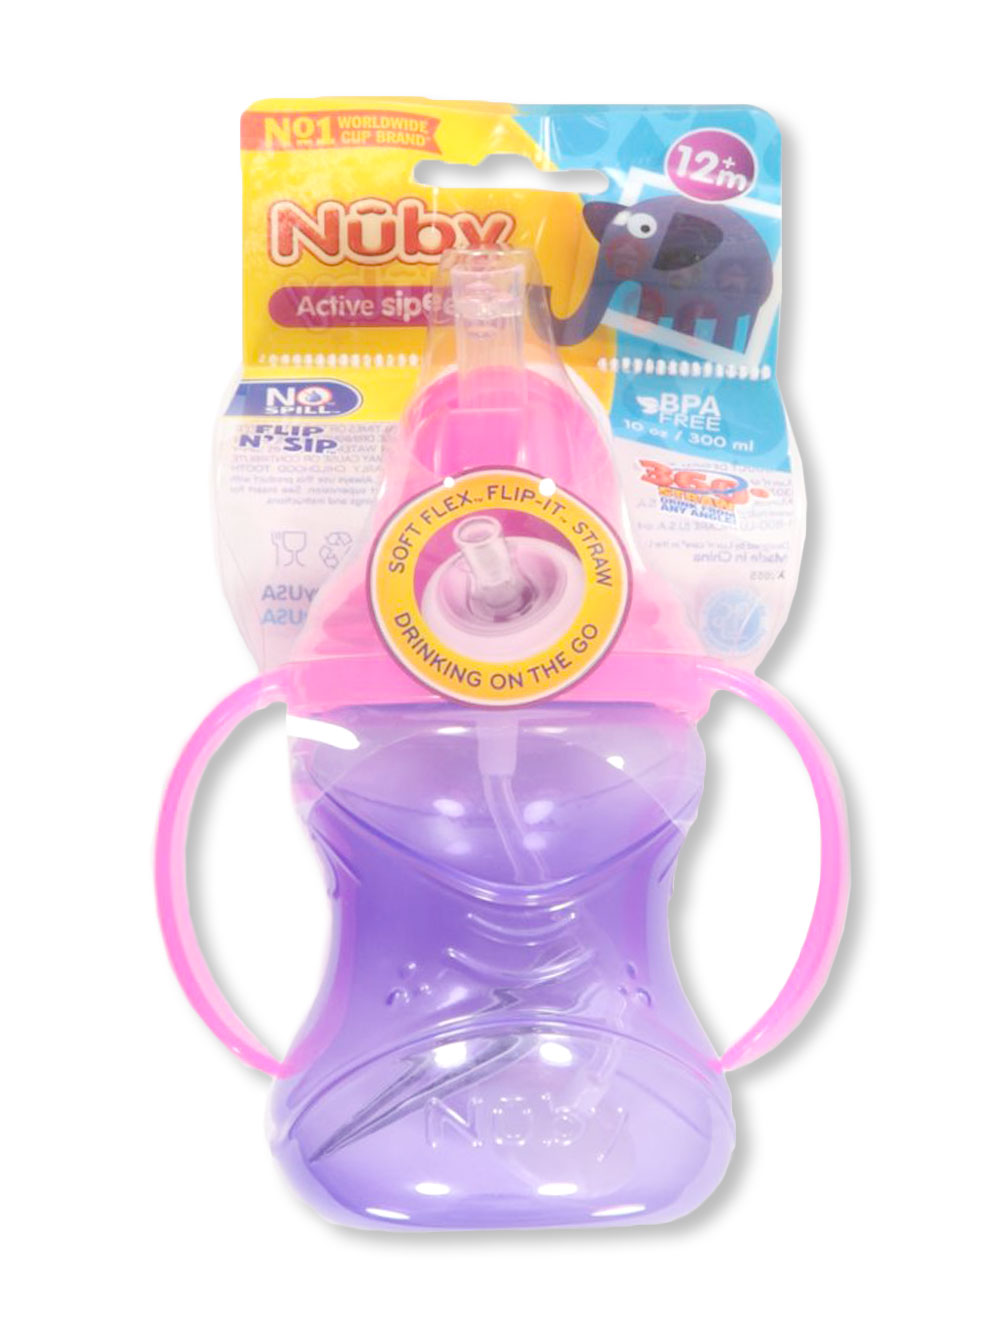 Nuby 2-Pack 10-oz No-Spill Flexi Straw Cup - Purple/Pink Pink/Purple